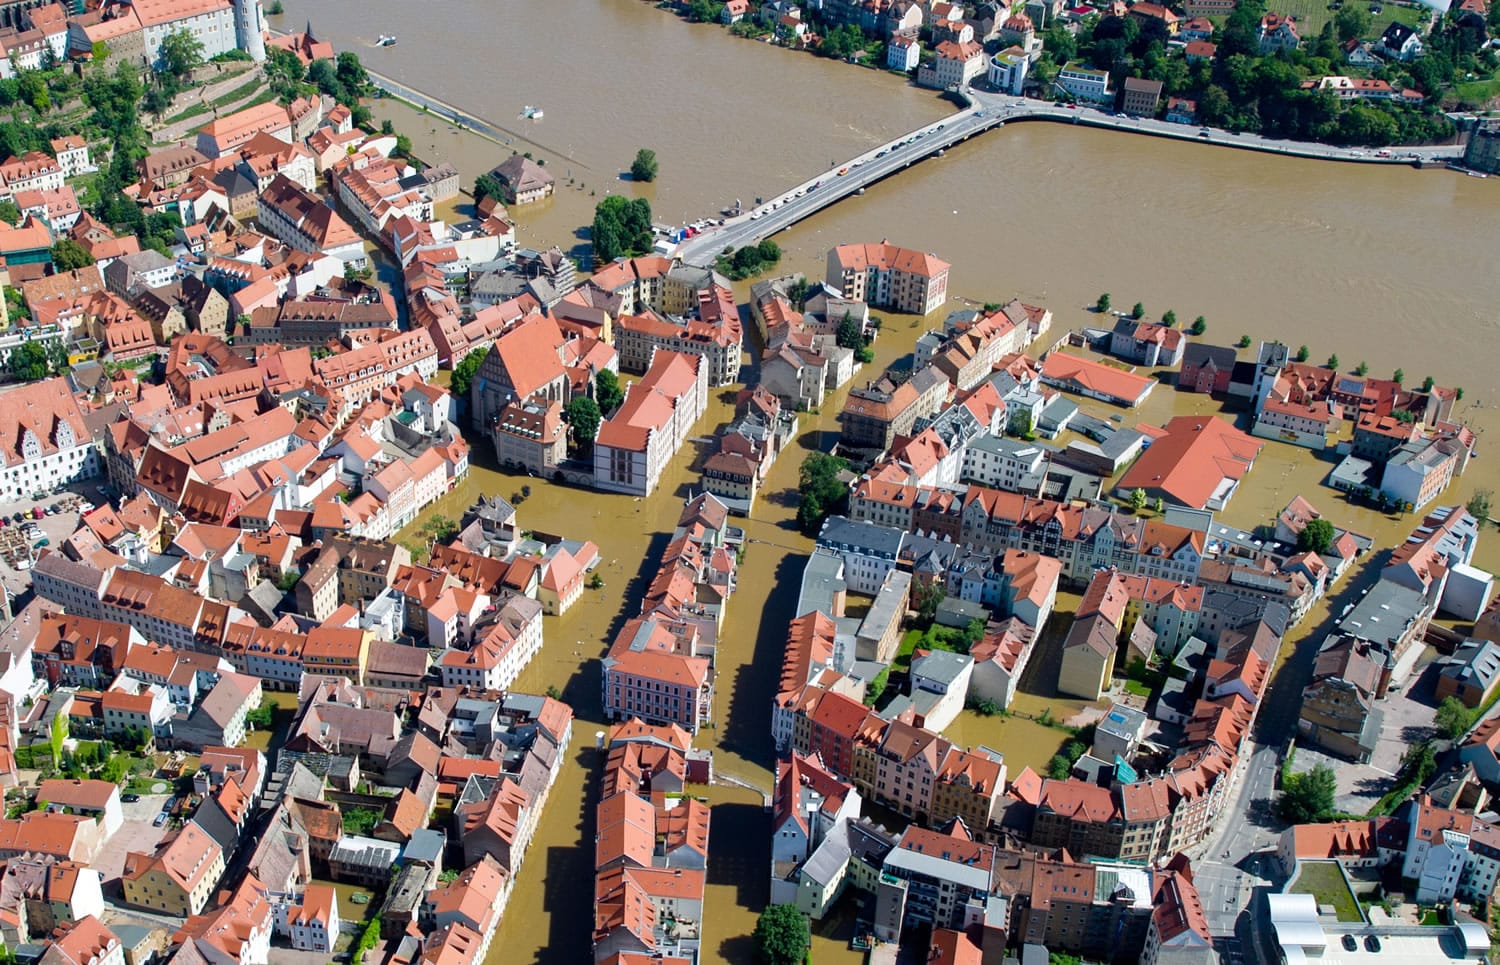 The Elbe River flooded the historical old town of Meissen, eastern Germany, on Sunday.